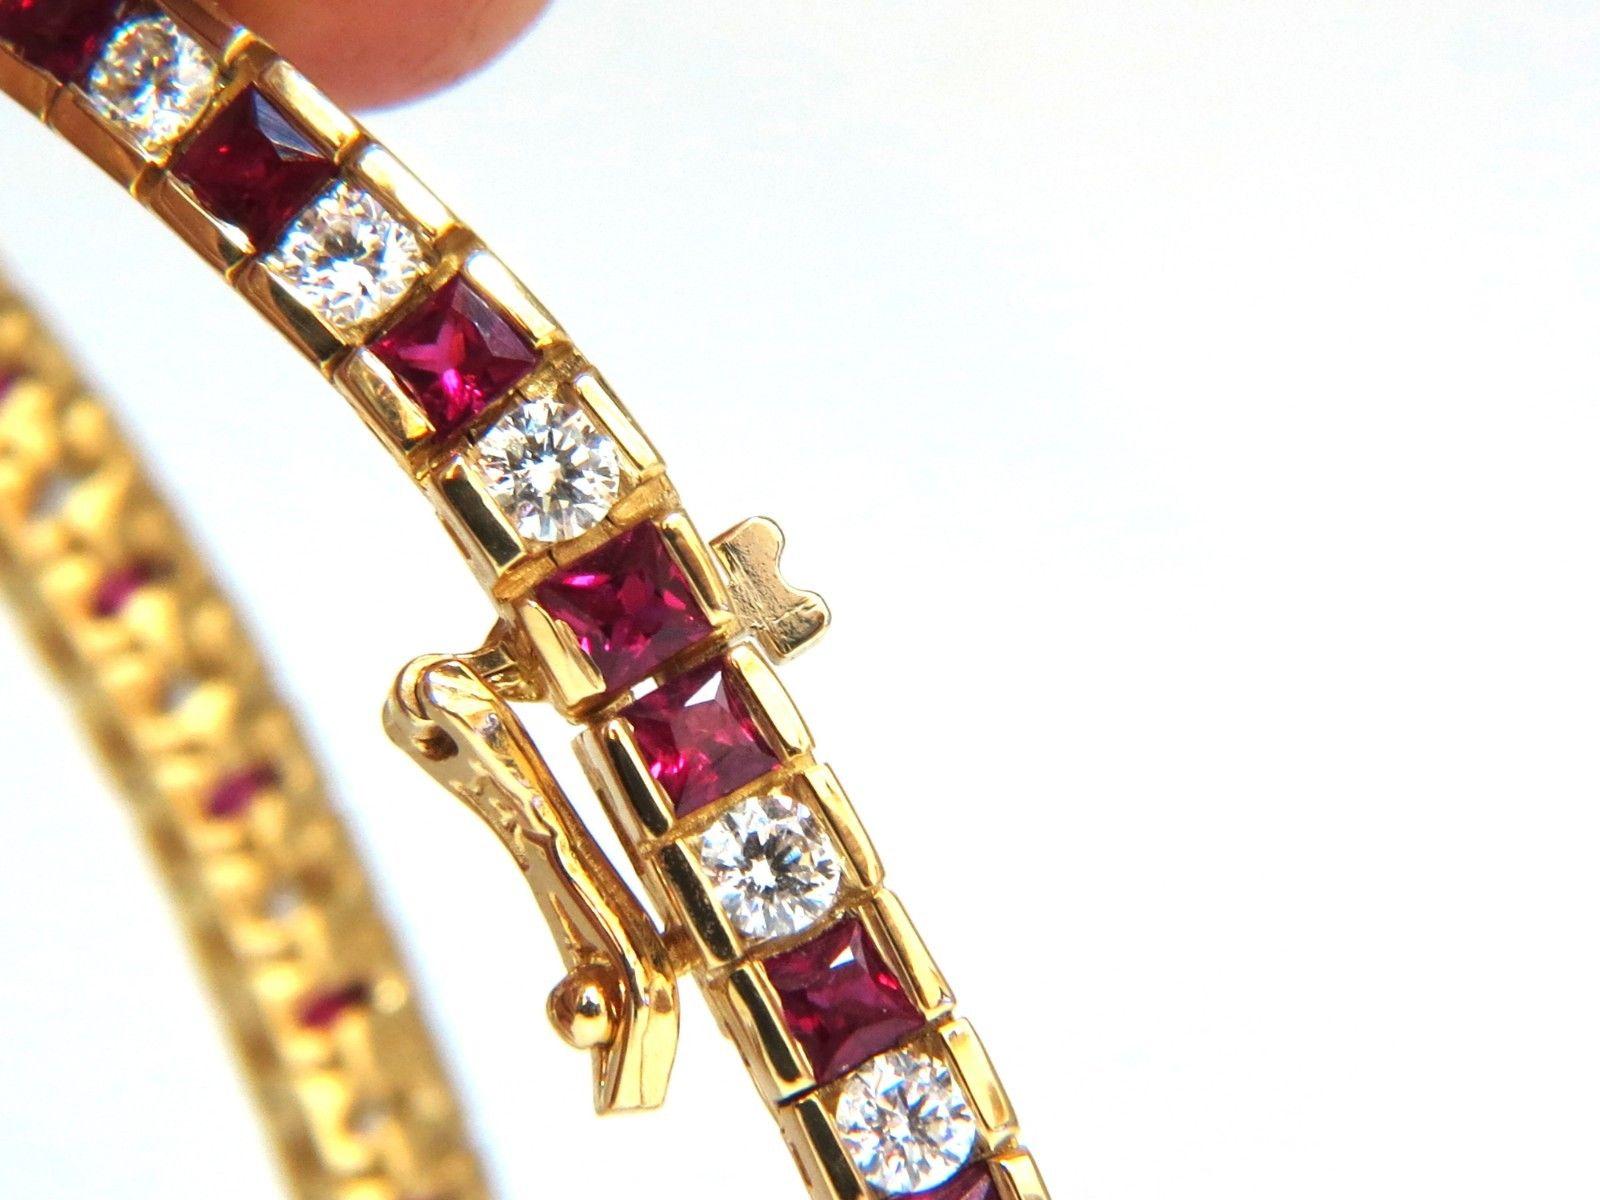 Ruby & Classic Alternating Tennis.

Channel Prime

4.50ct. Natural ruby bracelet.

Rounds, full cuts 

Clean clarity

Transparent & Vivid Reds.

2.70ct Natural Diamonds

Rounds & full cuts

Vs-s clarity G-color

14kt. yellow gold 

14.8 Grams.

7